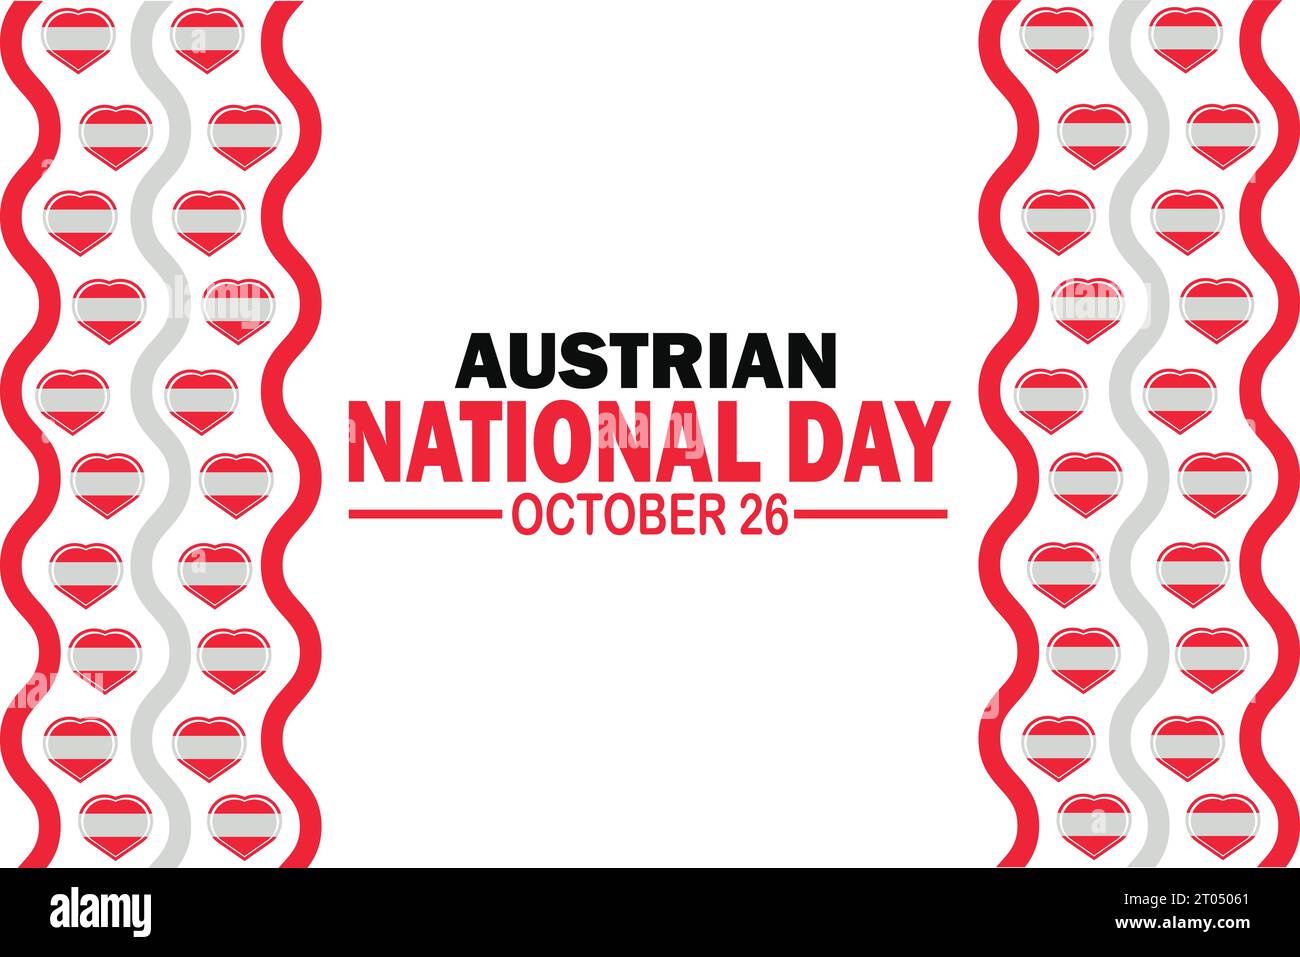 Austrian National Day. October 26. Holiday concept. Template for background, banner, card, poster with text inscription. Vector illustration. Stock Vector